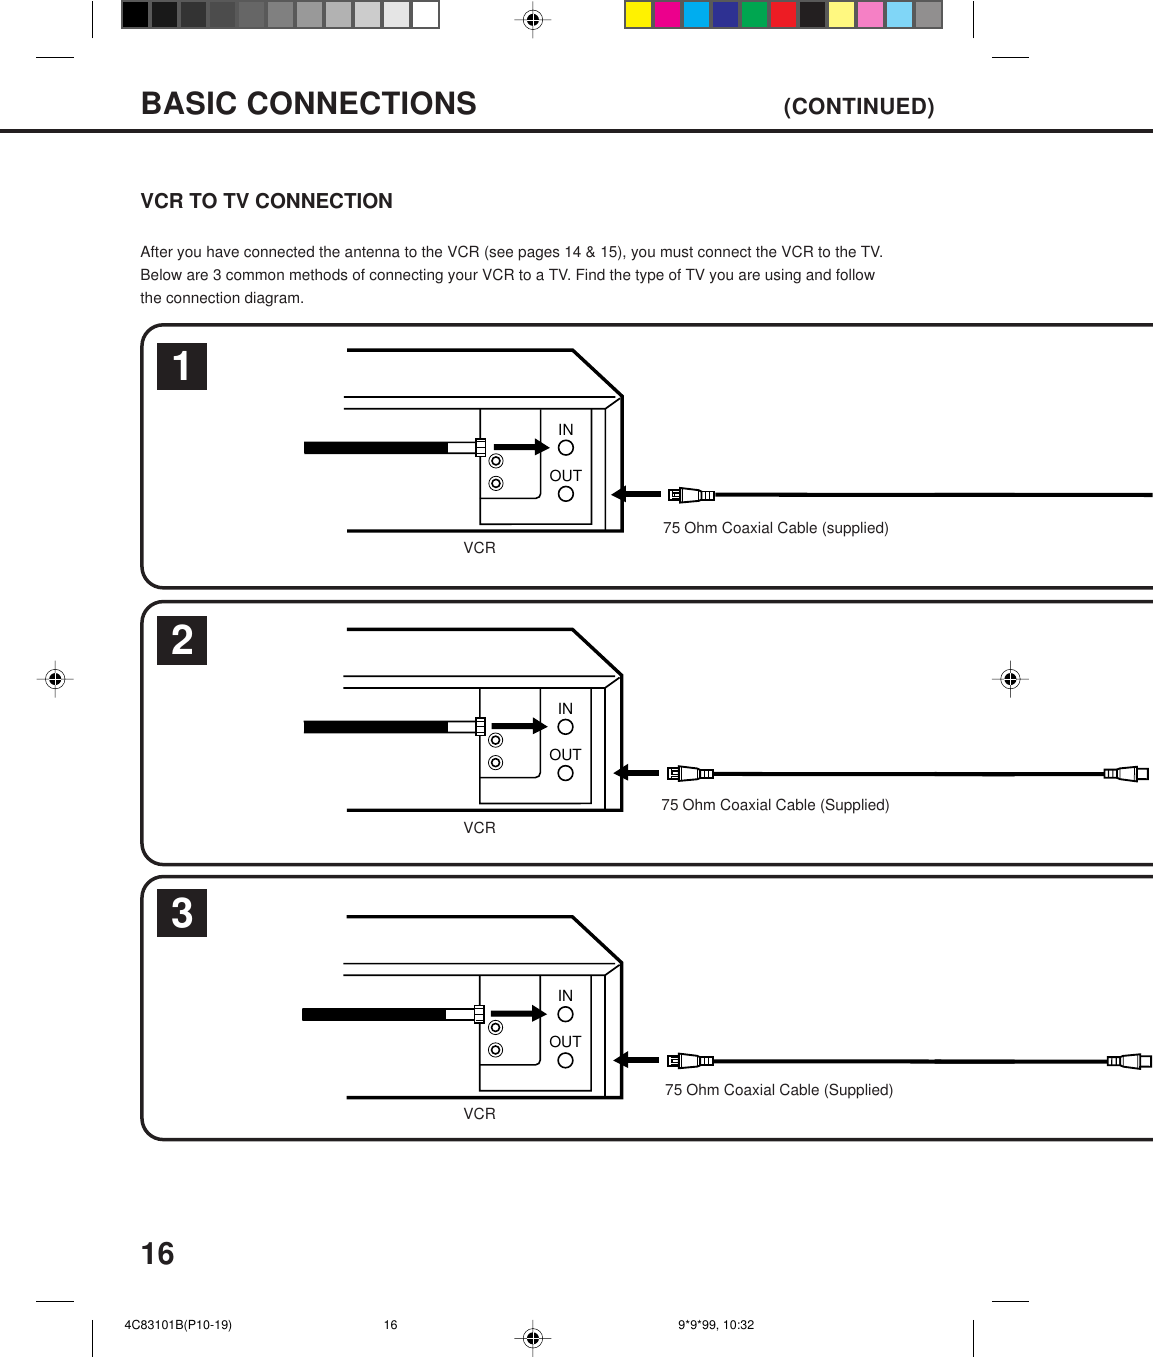 16OUTINOUTINOUTINVCR TO TV CONNECTIONAfter you have connected the antenna to the VCR (see pages 14 &amp; 15), you must connect the VCR to the TV.Below are 3 common methods of connecting your VCR to a TV. Find the type of TV you are using and followthe connection diagram.213BASIC CONNECTIONS  (CONTINUED)75 Ohm Coaxial Cable (Supplied)75 Ohm Coaxial Cable (Supplied)75 Ohm Coaxial Cable (supplied)VCRVCRVCR 4C83101B(P10-19) 9*9*99, 10:3216